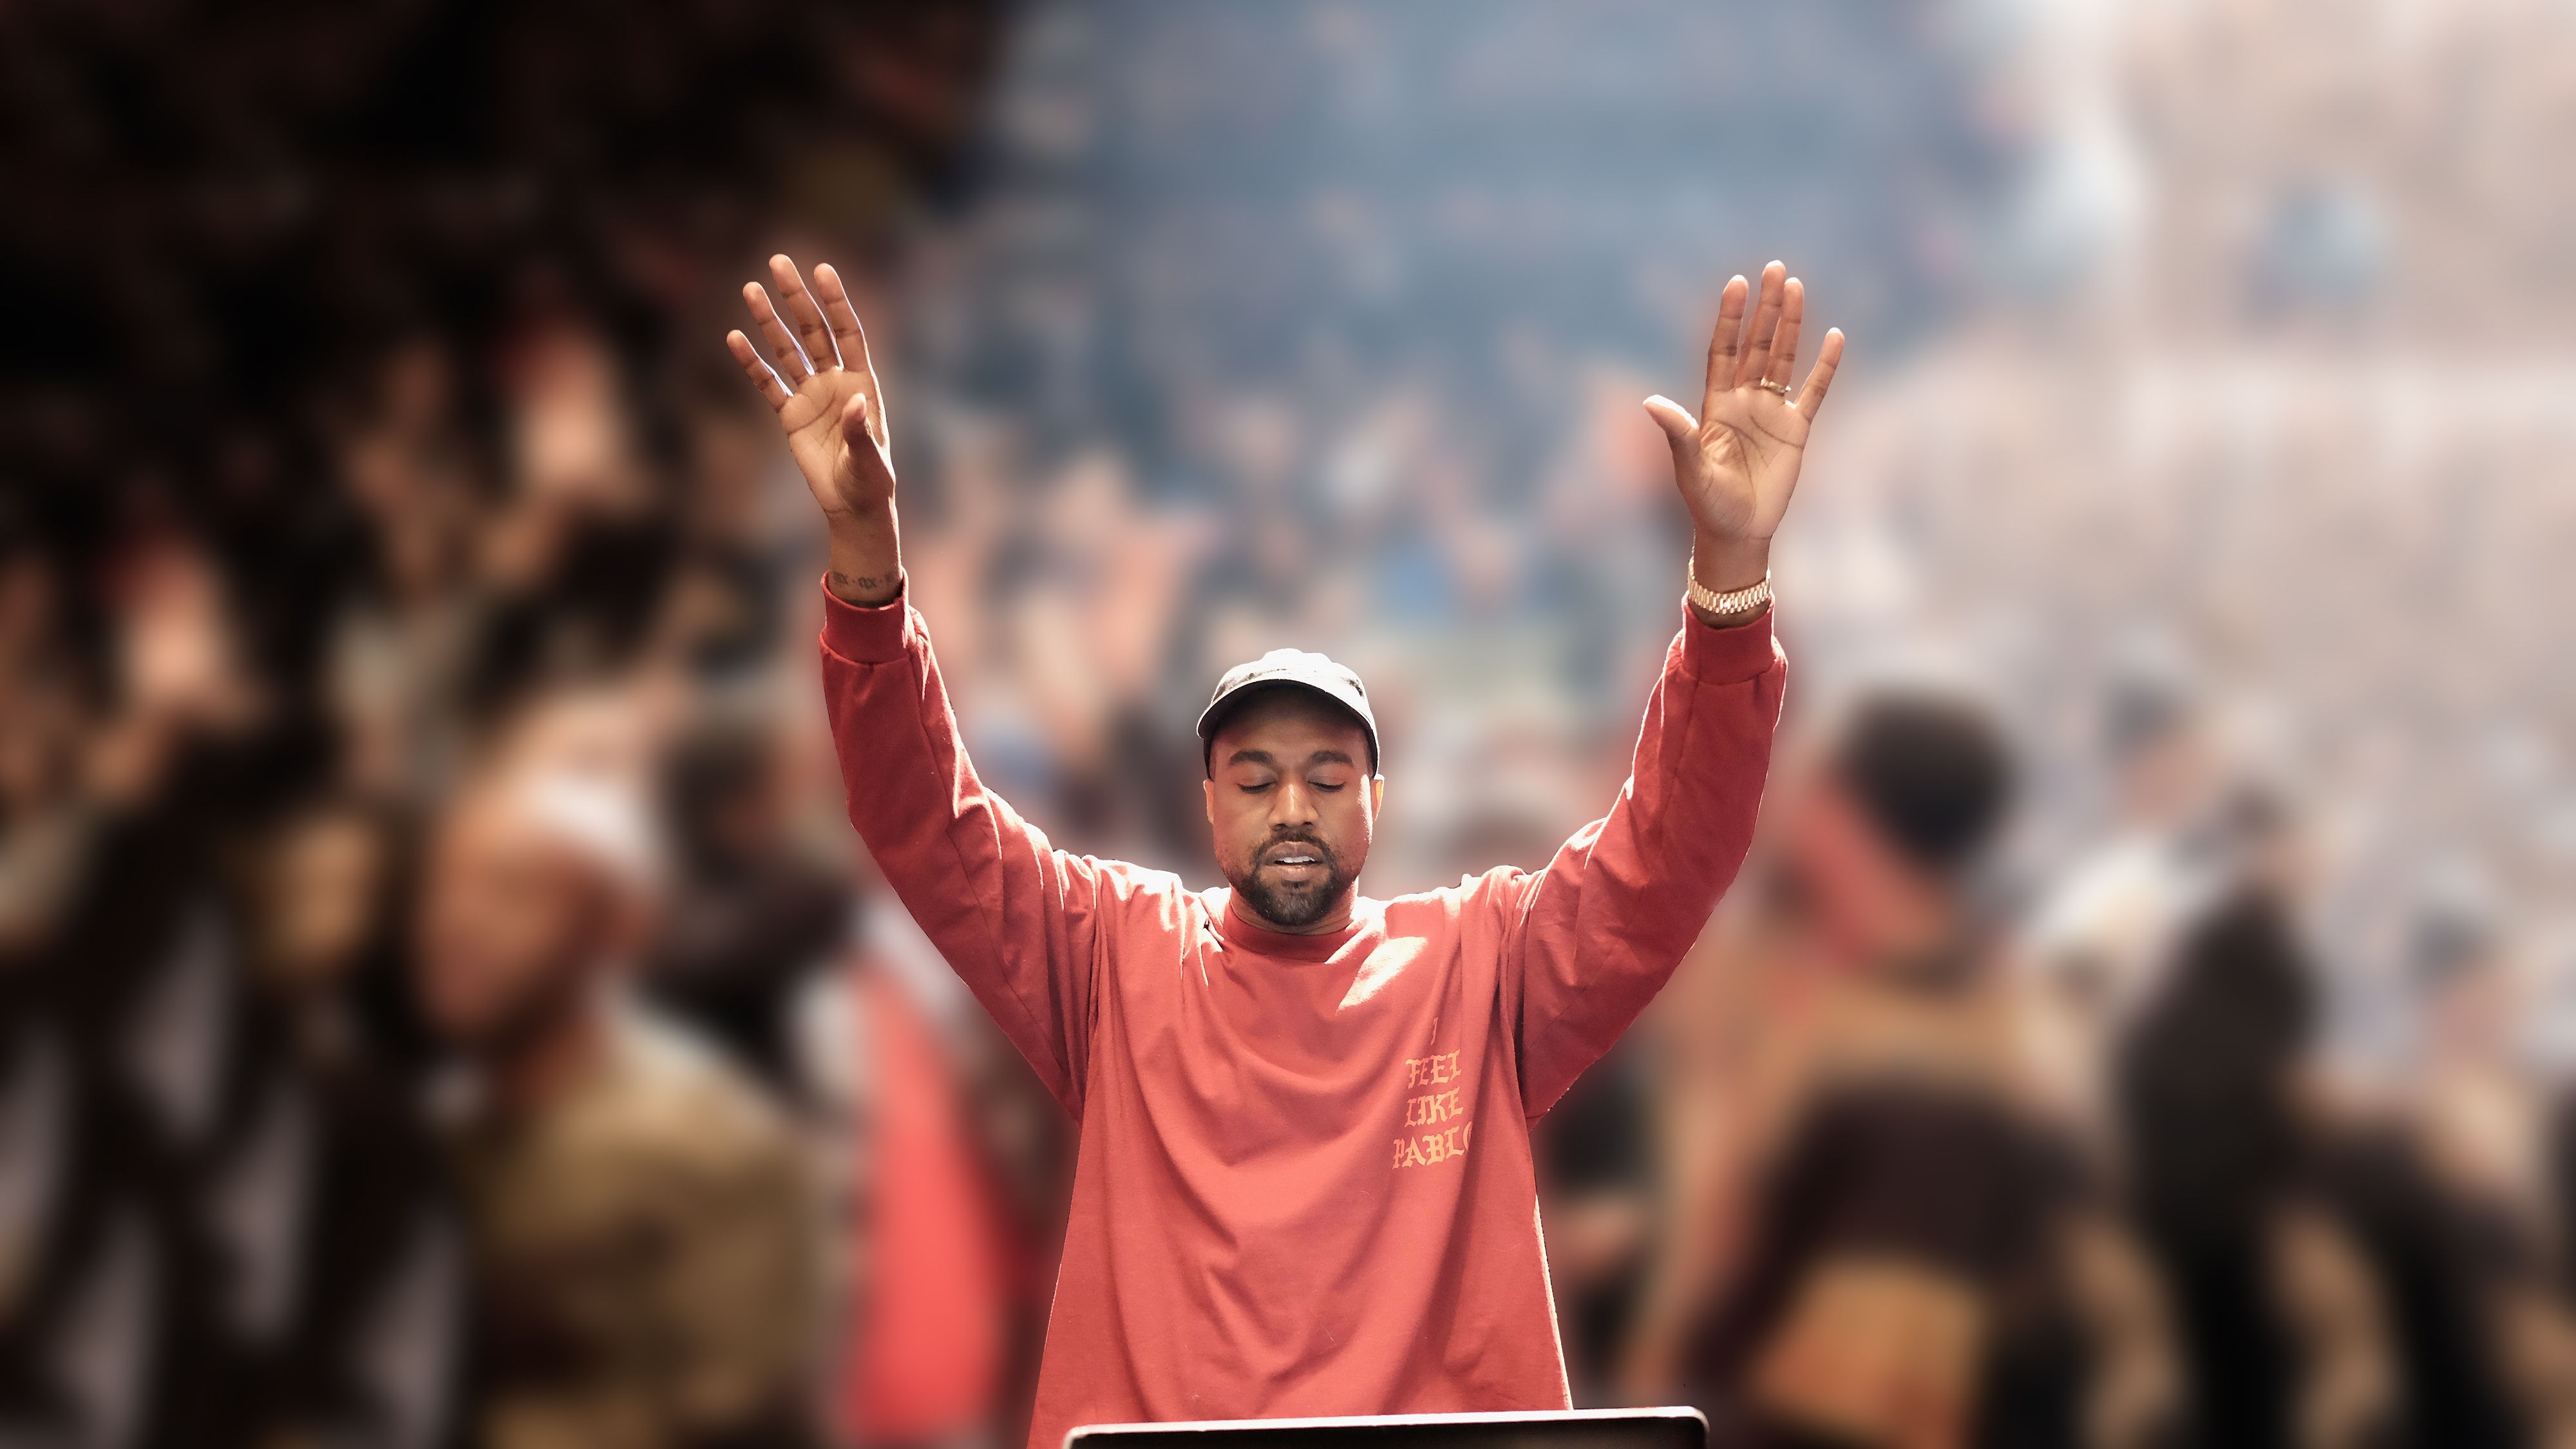 Kanye West With His Hands Up Wallpapers